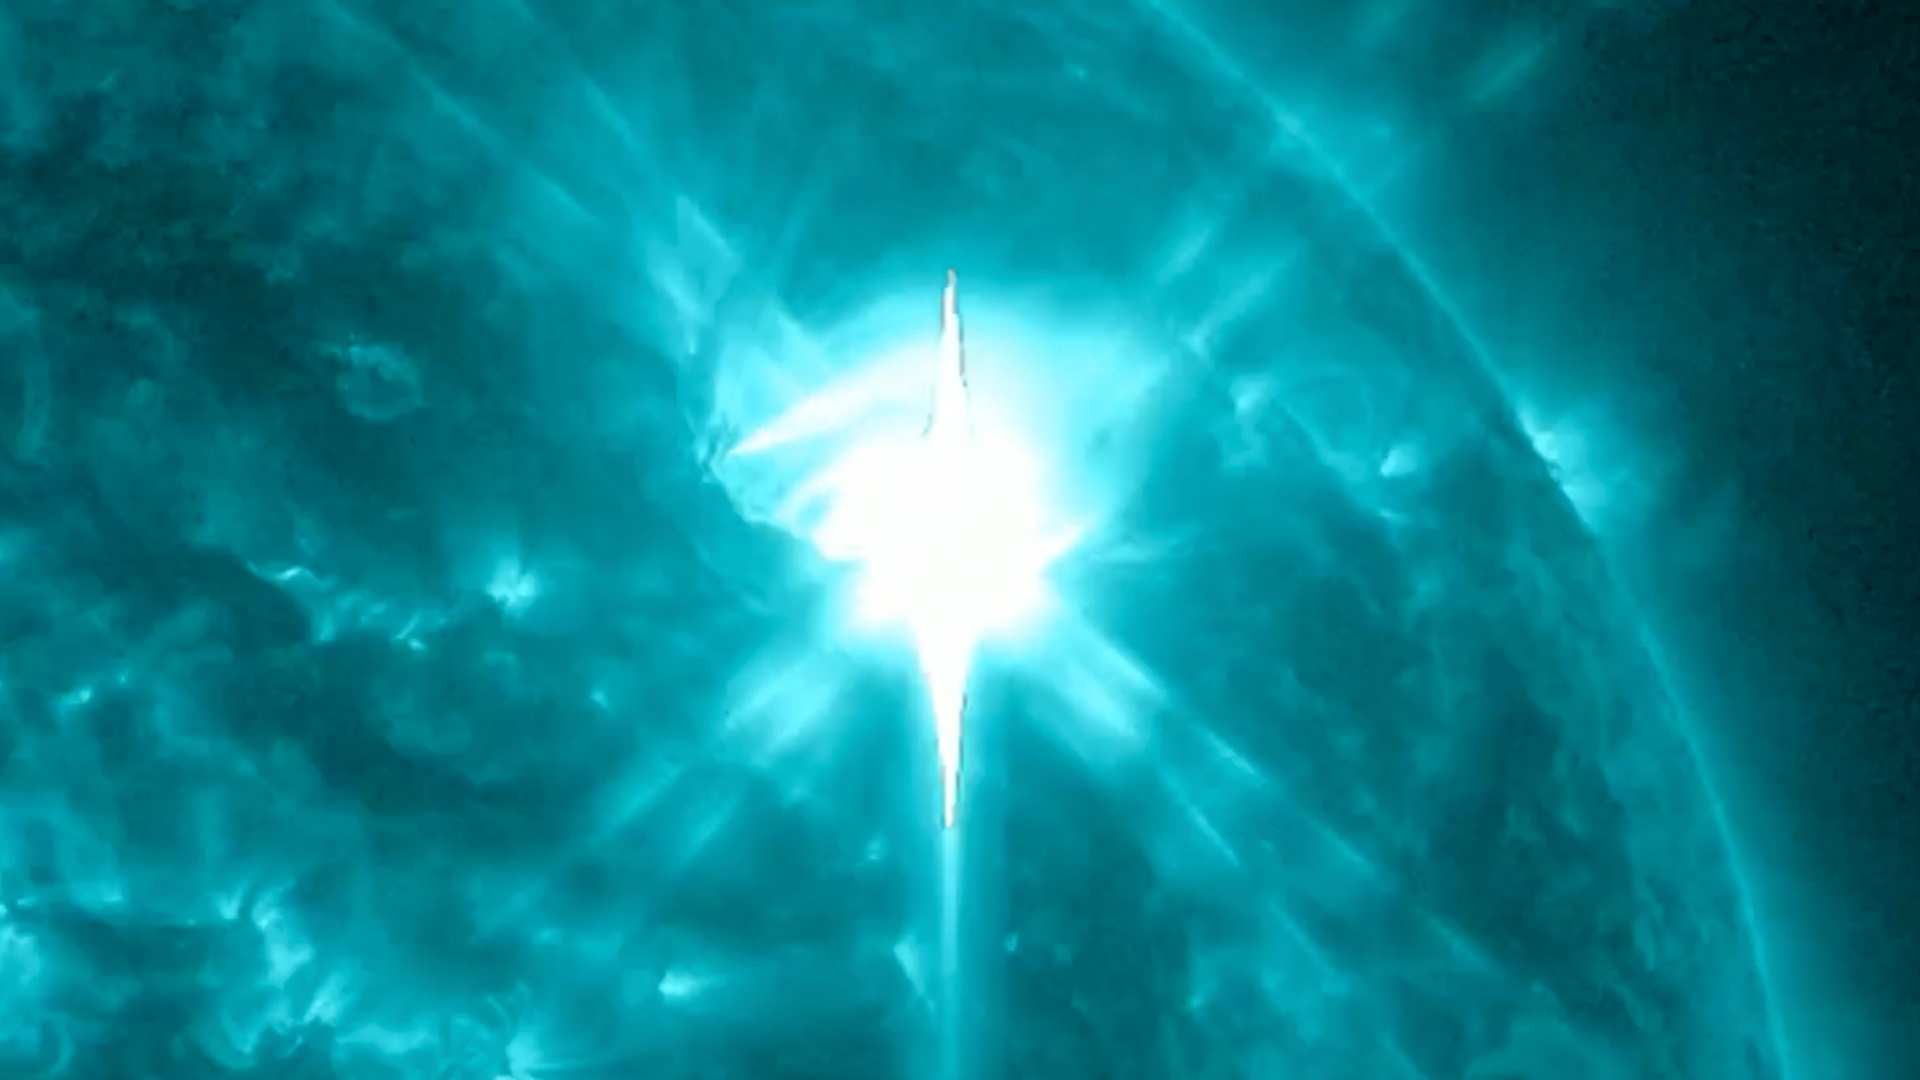 Sun unleashes X-class solar flare, radio blackouts reported (video) Space